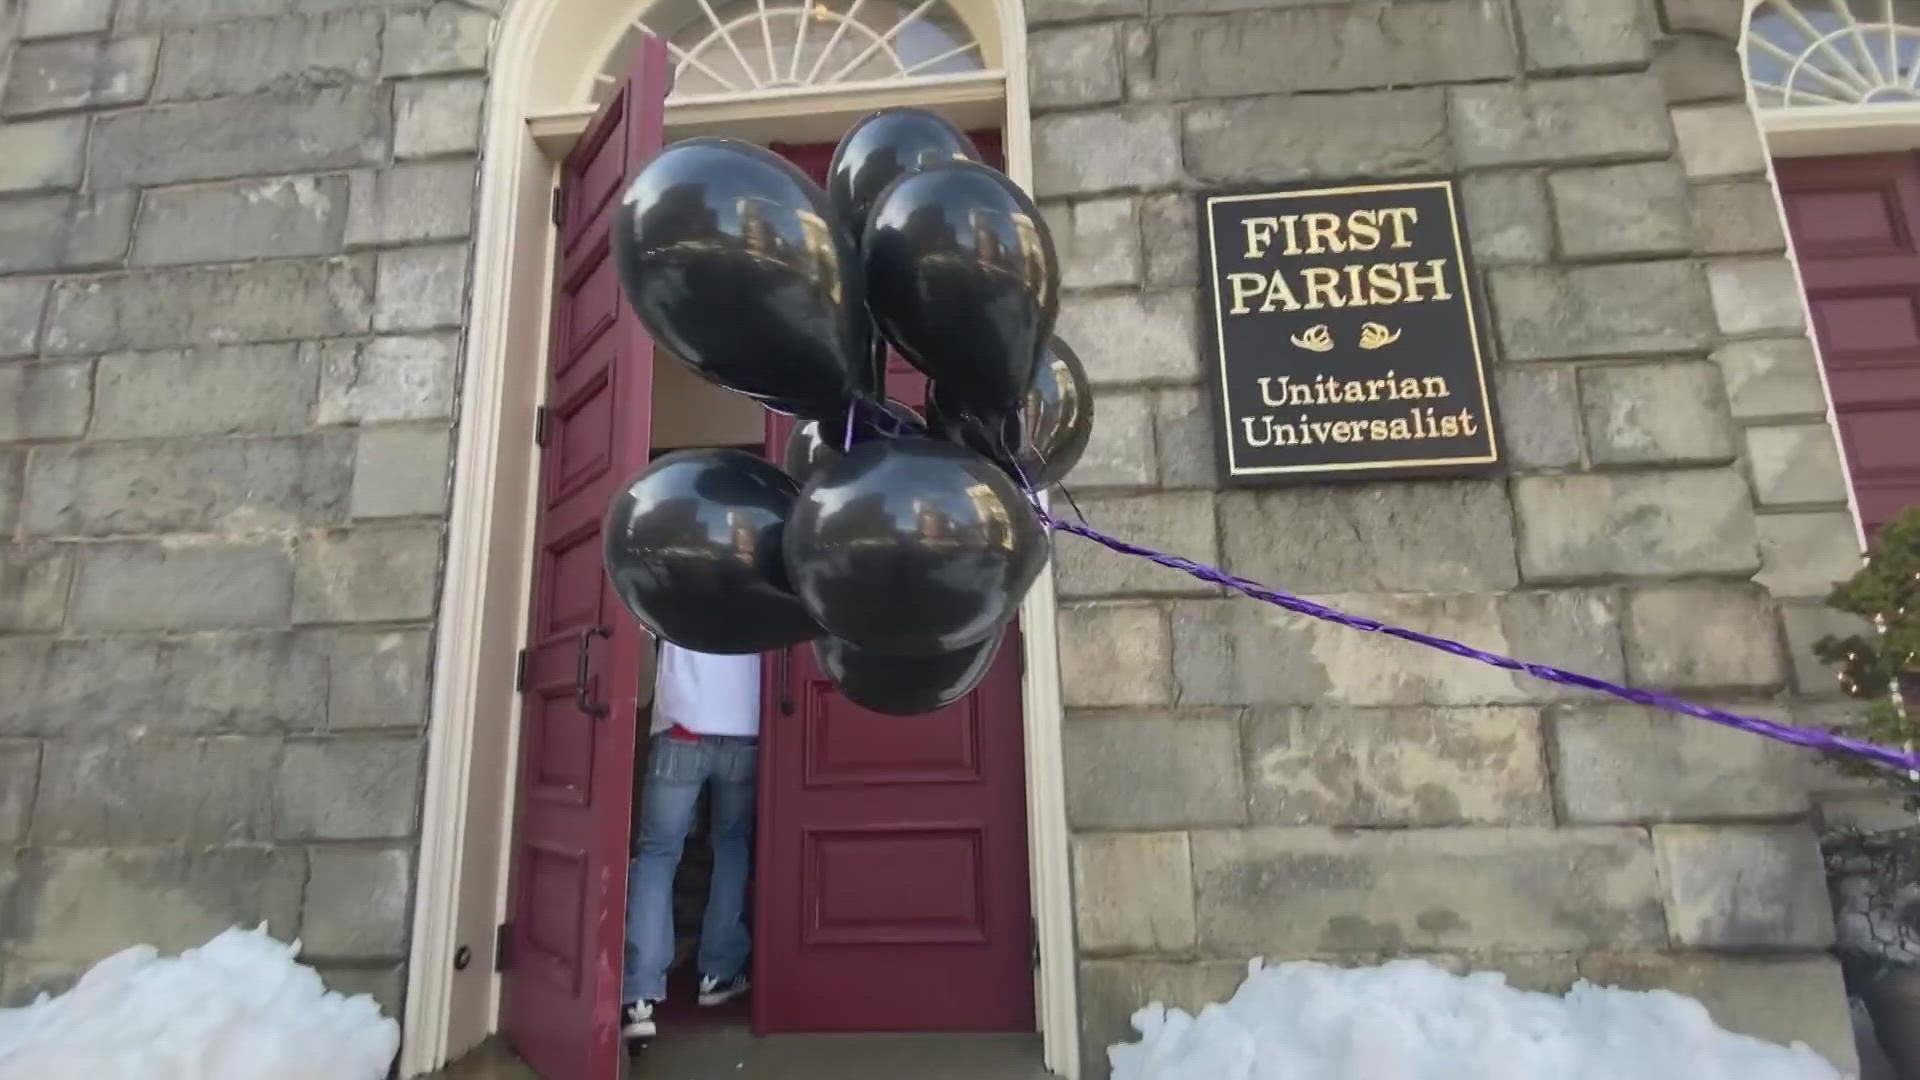 Advocates against drug addiction in southern Maine came together in Portland Sunday for the annual 'Black Balloon Day', to remember those who died from drug use.